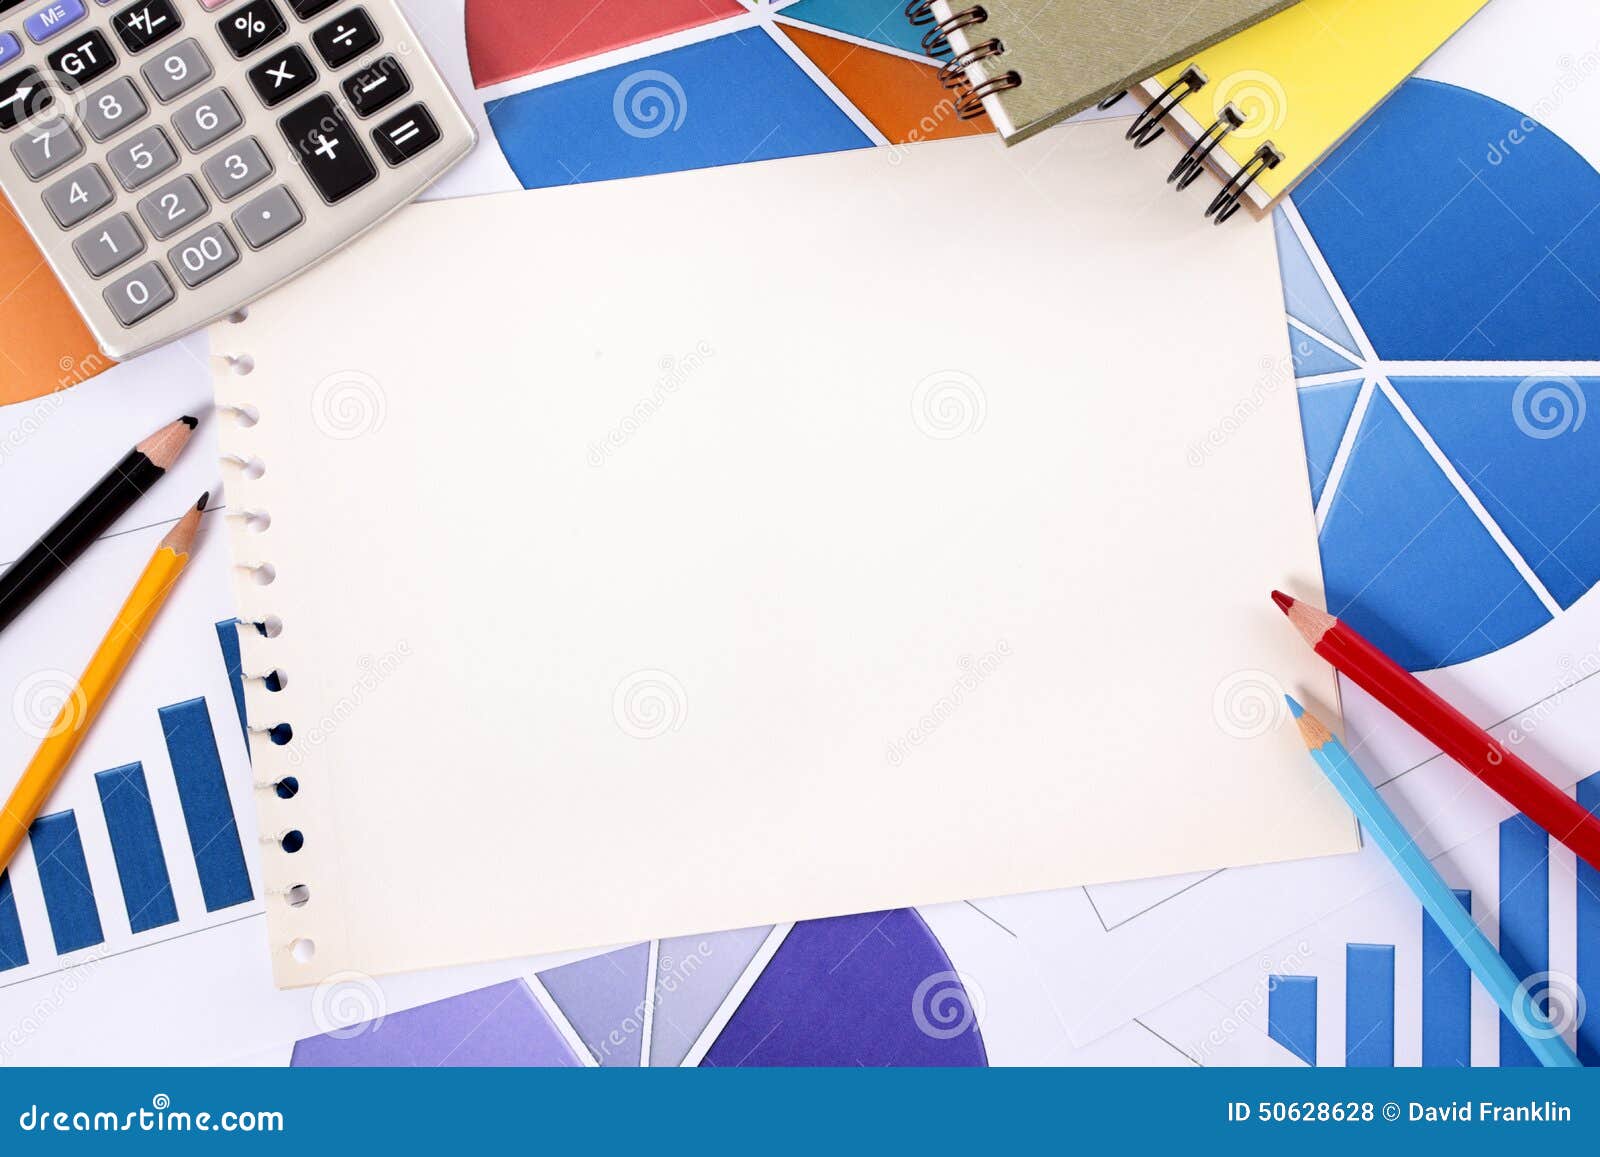 Financial Accounting Background Copy Space Stock Photo 50628628 - Megapixl